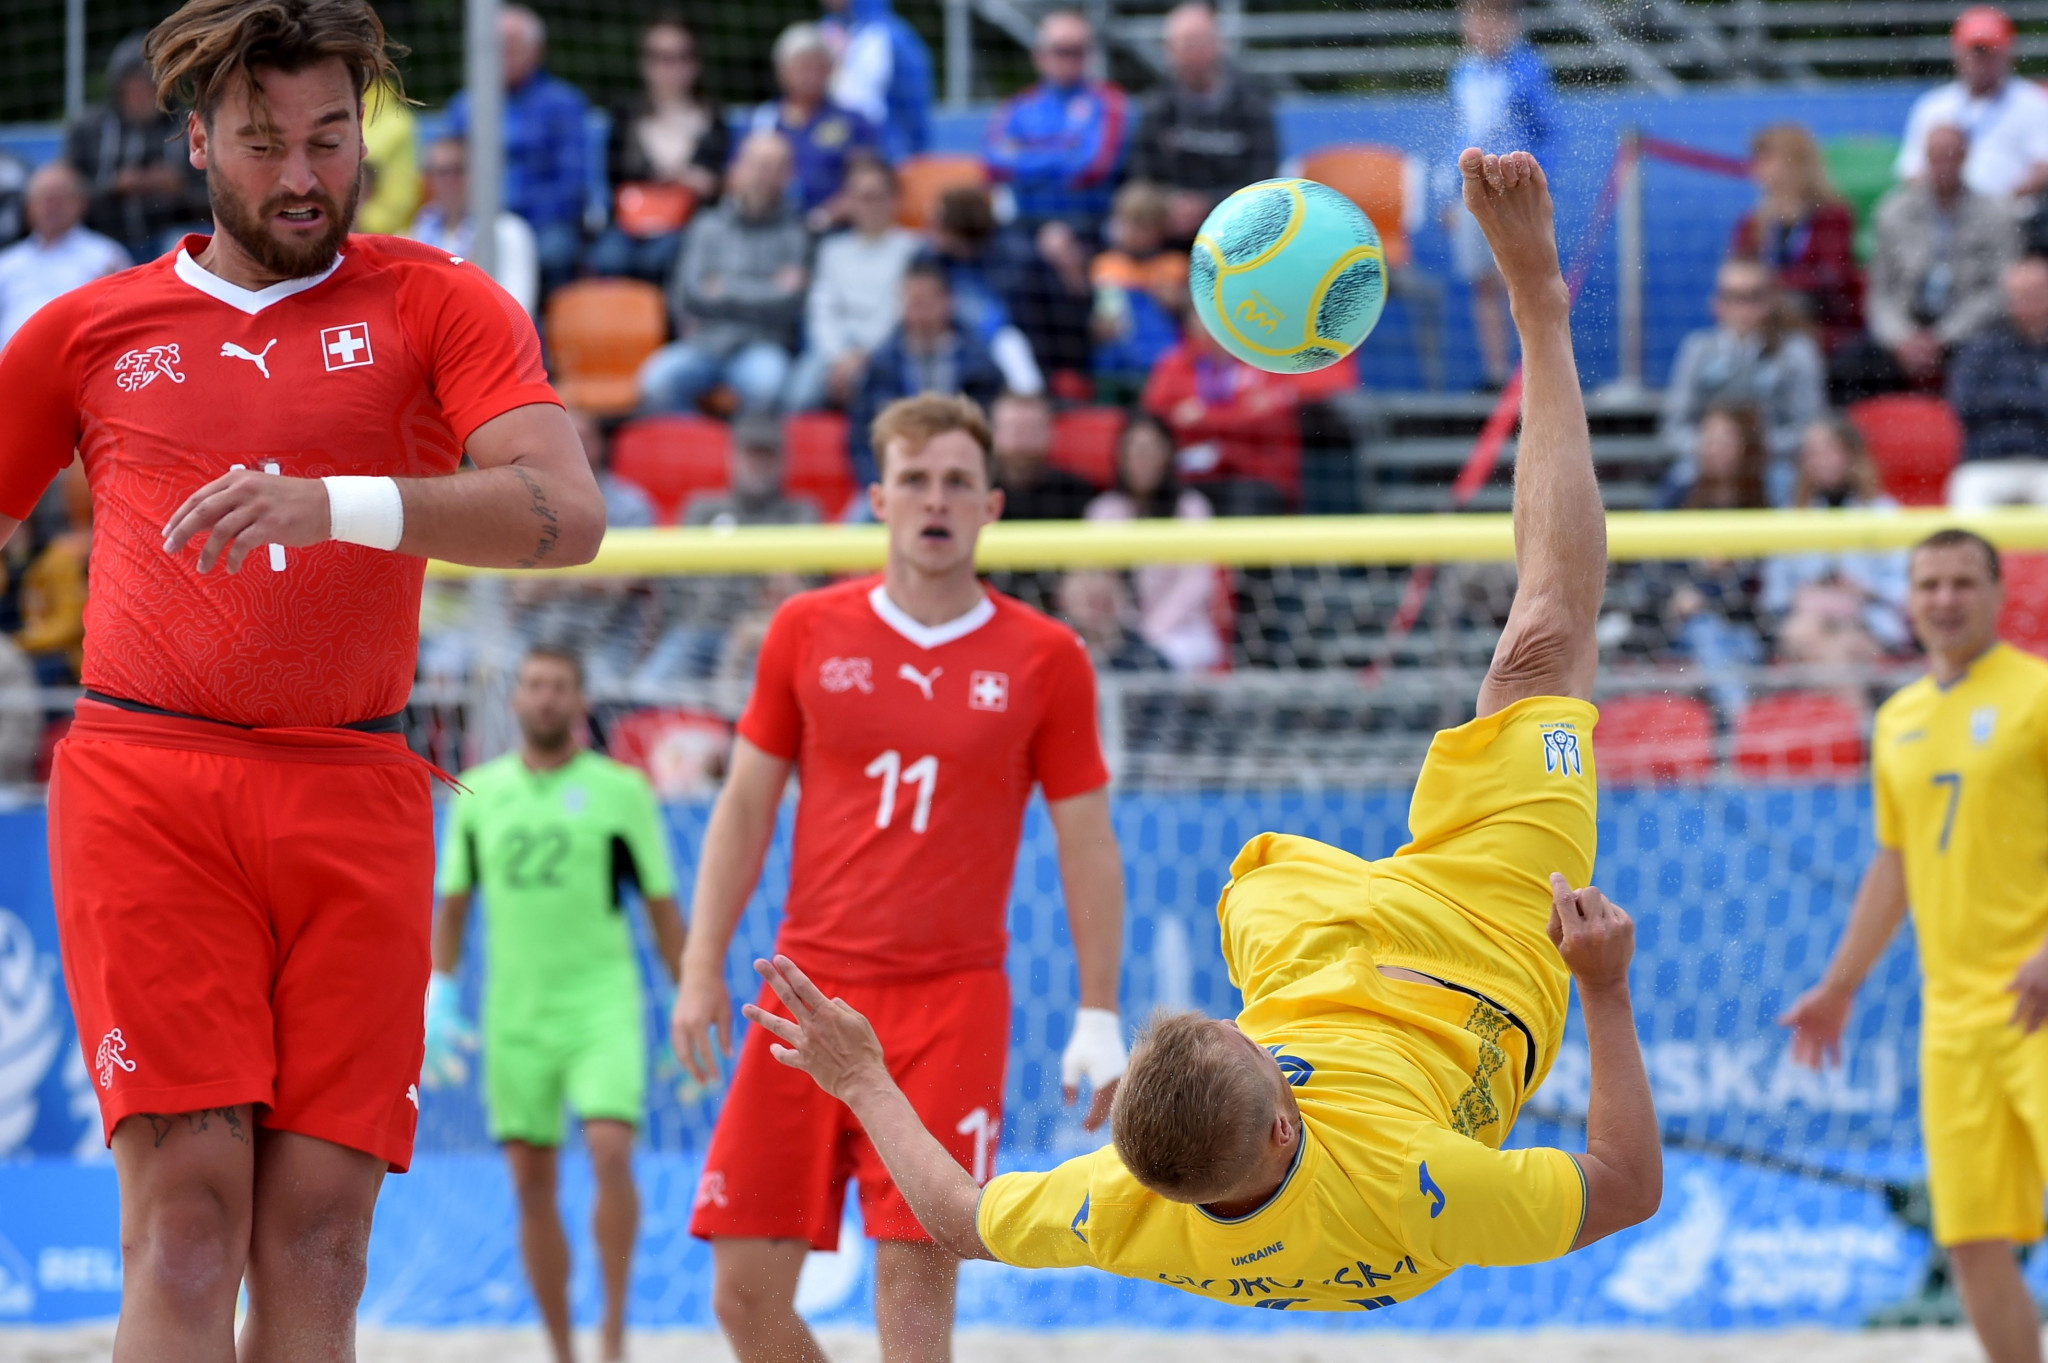 Four men's groups have been drawn for the beach soccer tournament ©Getty Images